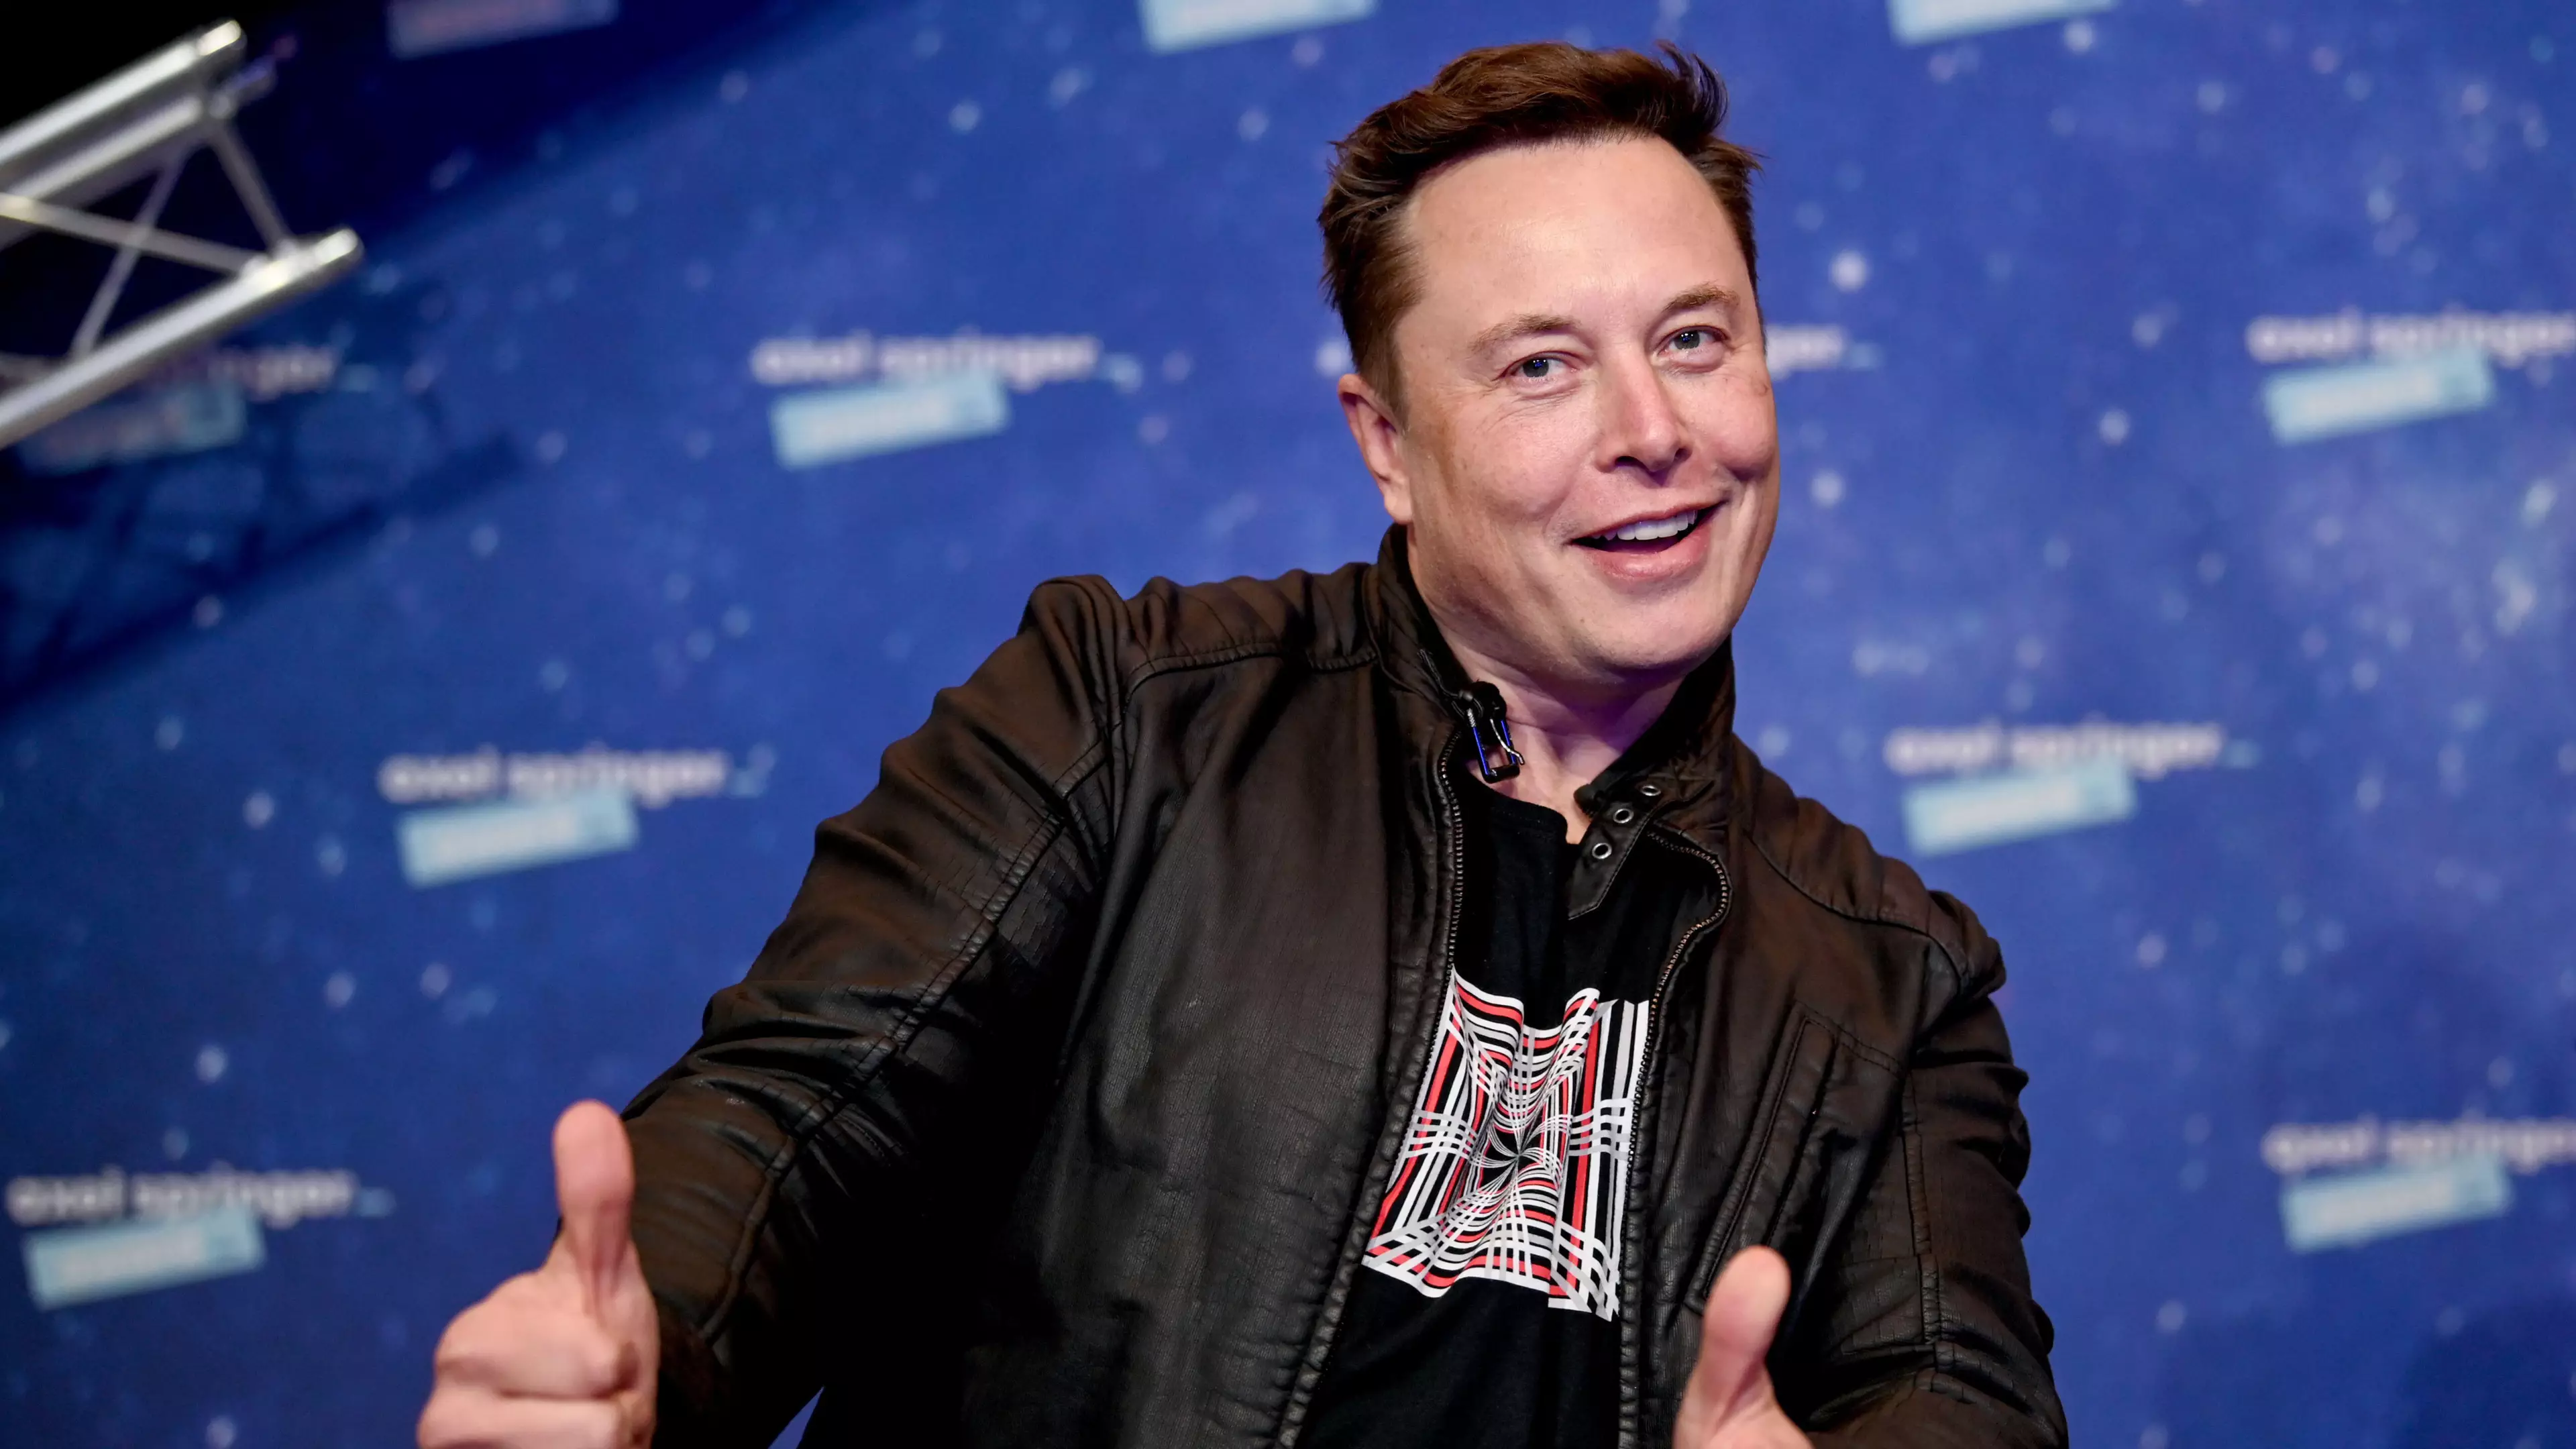 It Takes Elon Musk Less Than 3 Minutes To Earn The Average Australian Salary